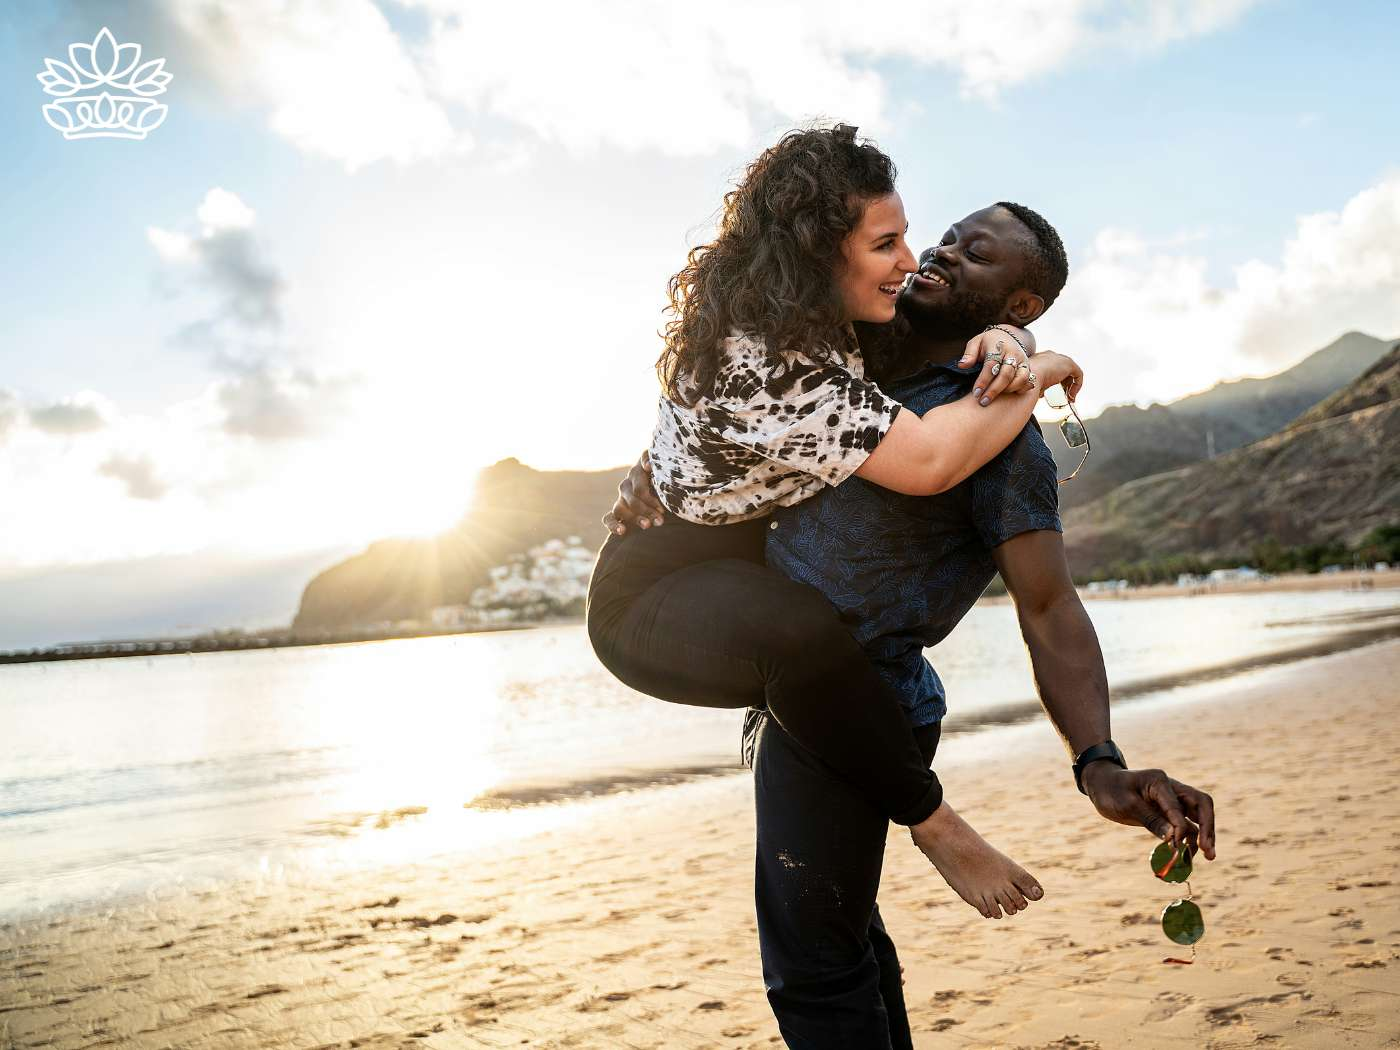 A joyful moment on the beach with a man carrying his partner in a playful embrace, both laughing under the setting sun. This scene epitomizes the happiness and love celebrated by the Engagement Gift Boxes Collection from Fabulous Flowers and Gifts, perfect for such precious life moments.